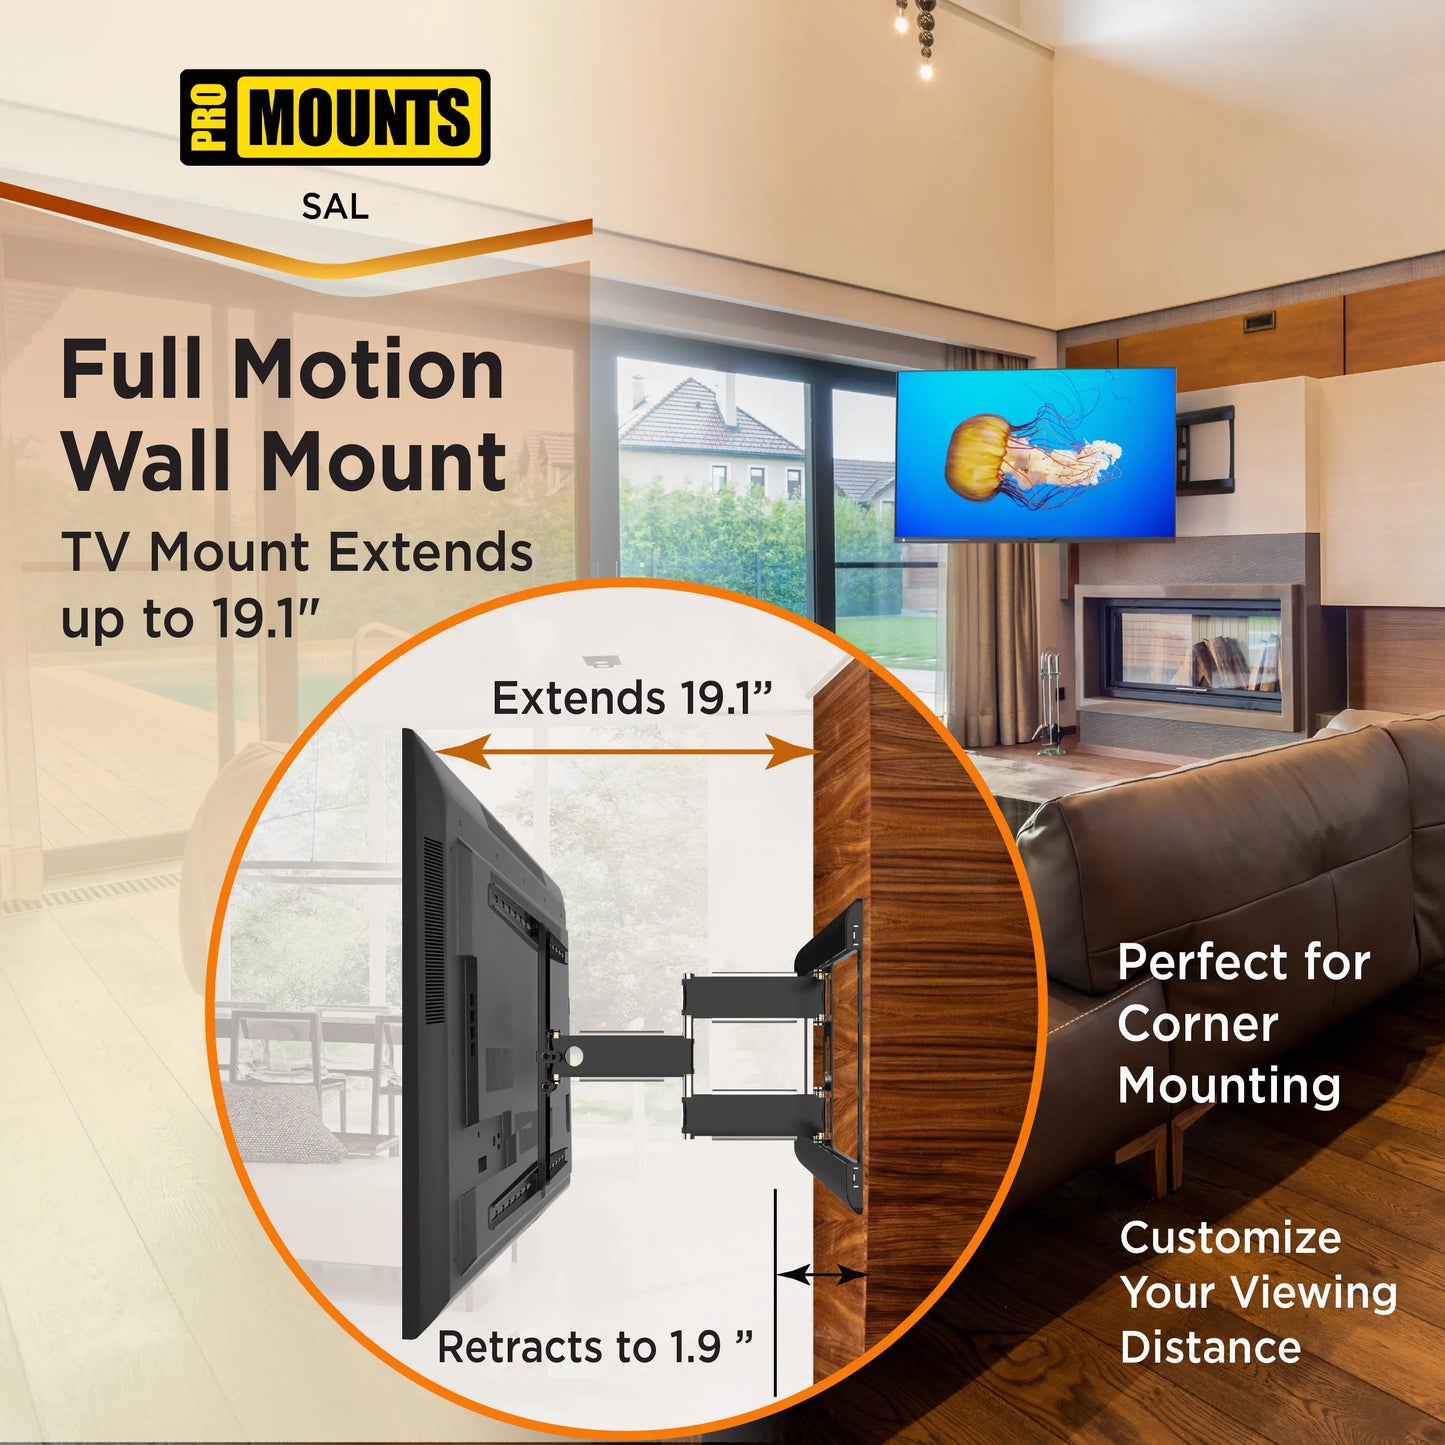 ProMounts Articulating / Full-Motion TV Wall Mount for 37" to 85" TVs up to 120 lbs (SAL)